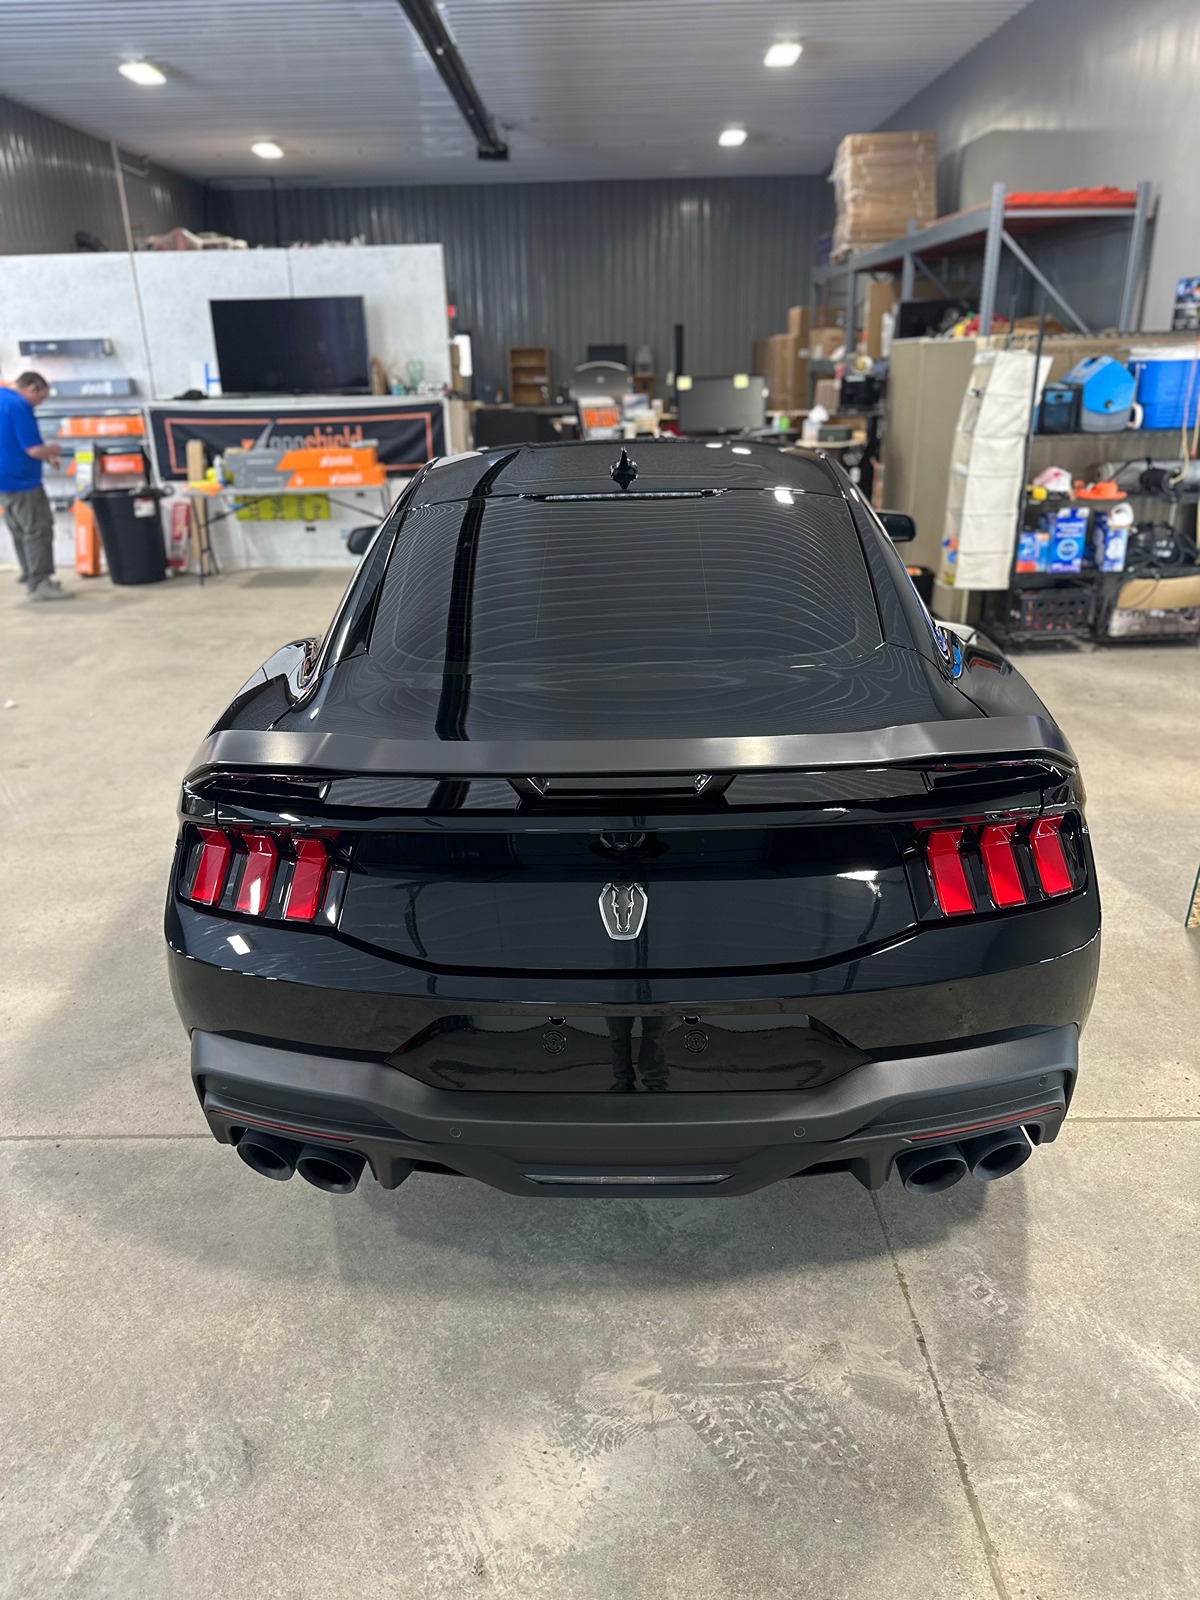 S650 Mustang Let's talk tint - Anyone go light on tint maybe 50% all around? IMG_8042